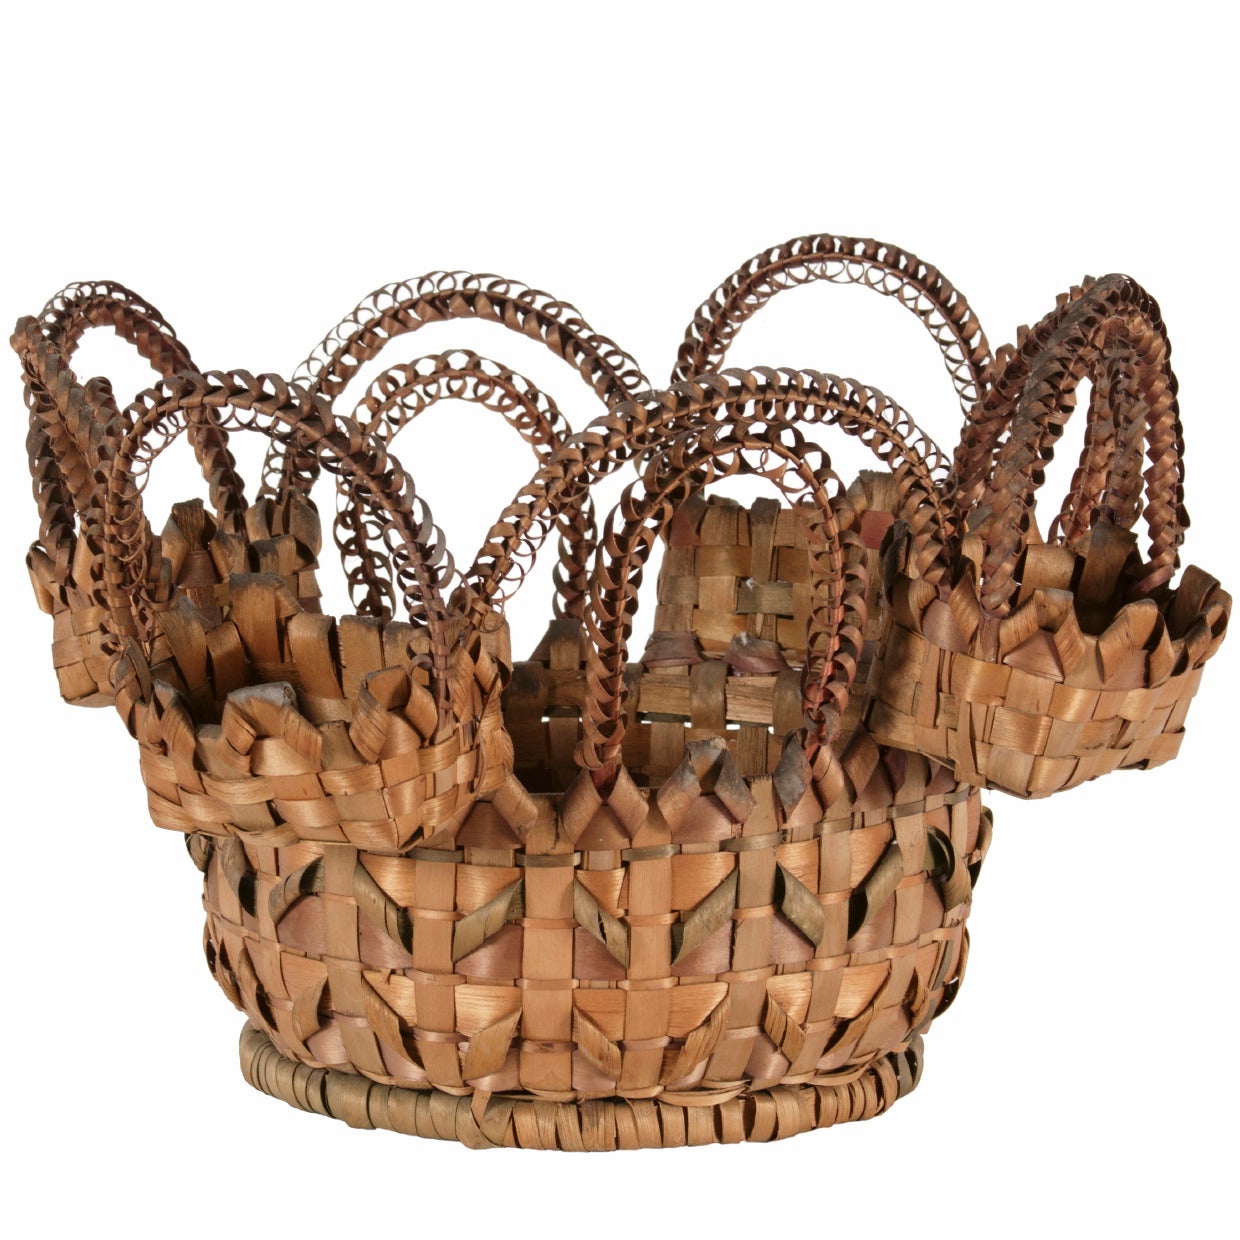 Extraordinary Passamaquoddy (Maine) Native American Sewing Basket, Dated 1891 For Sale